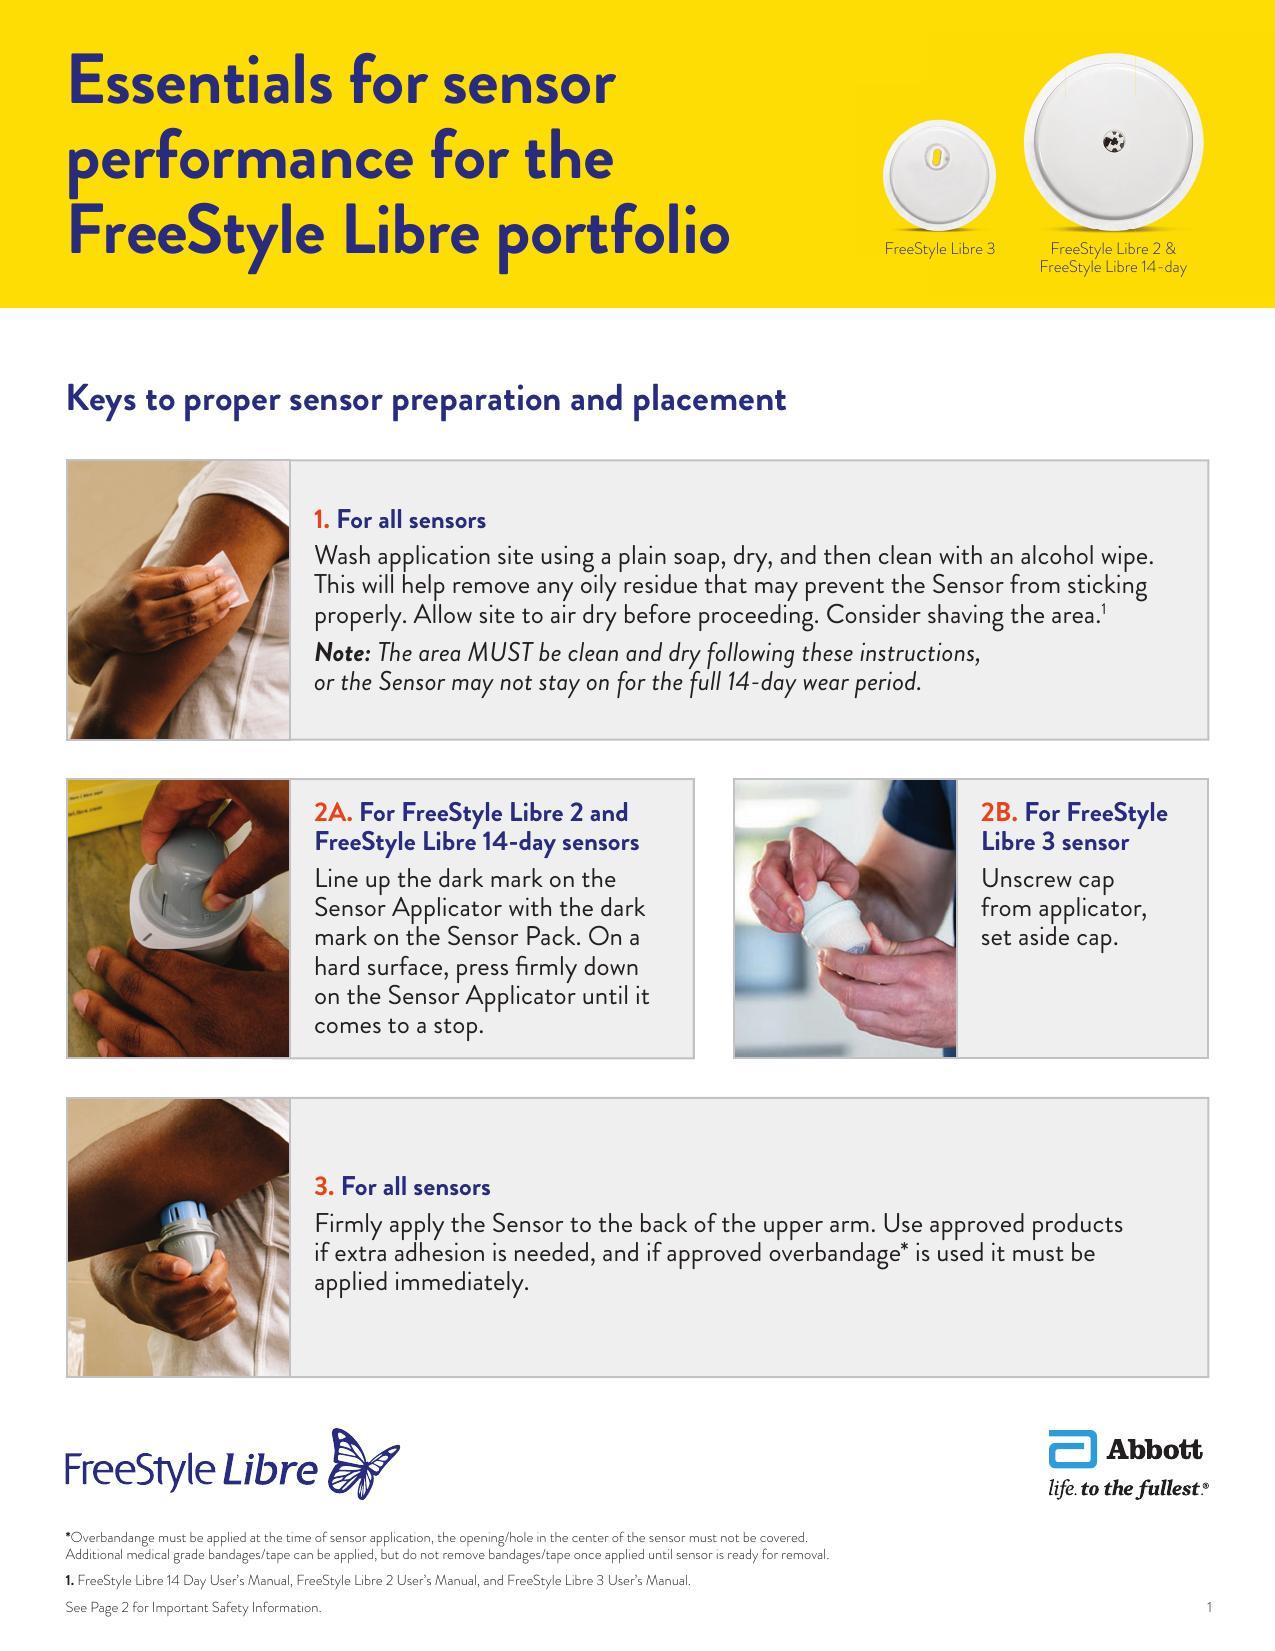 freestyle-libre-14-day-user-manual-freestyle-libre-user-manual-and-freestyle-libre-3-user-manual.pdf